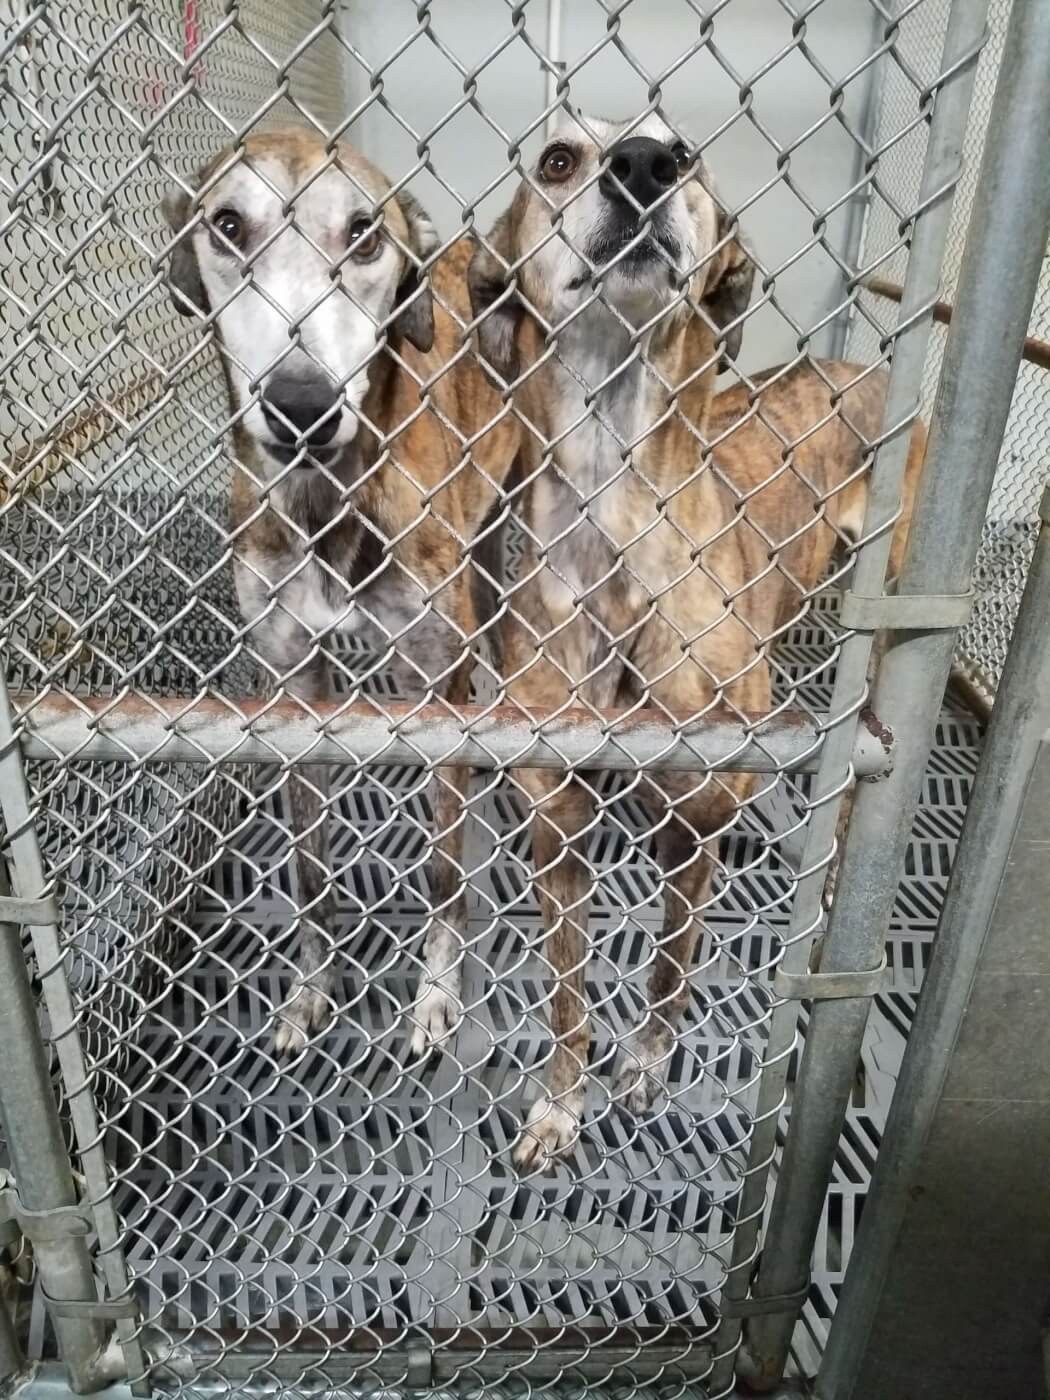 Two dogs stand in a barren cage